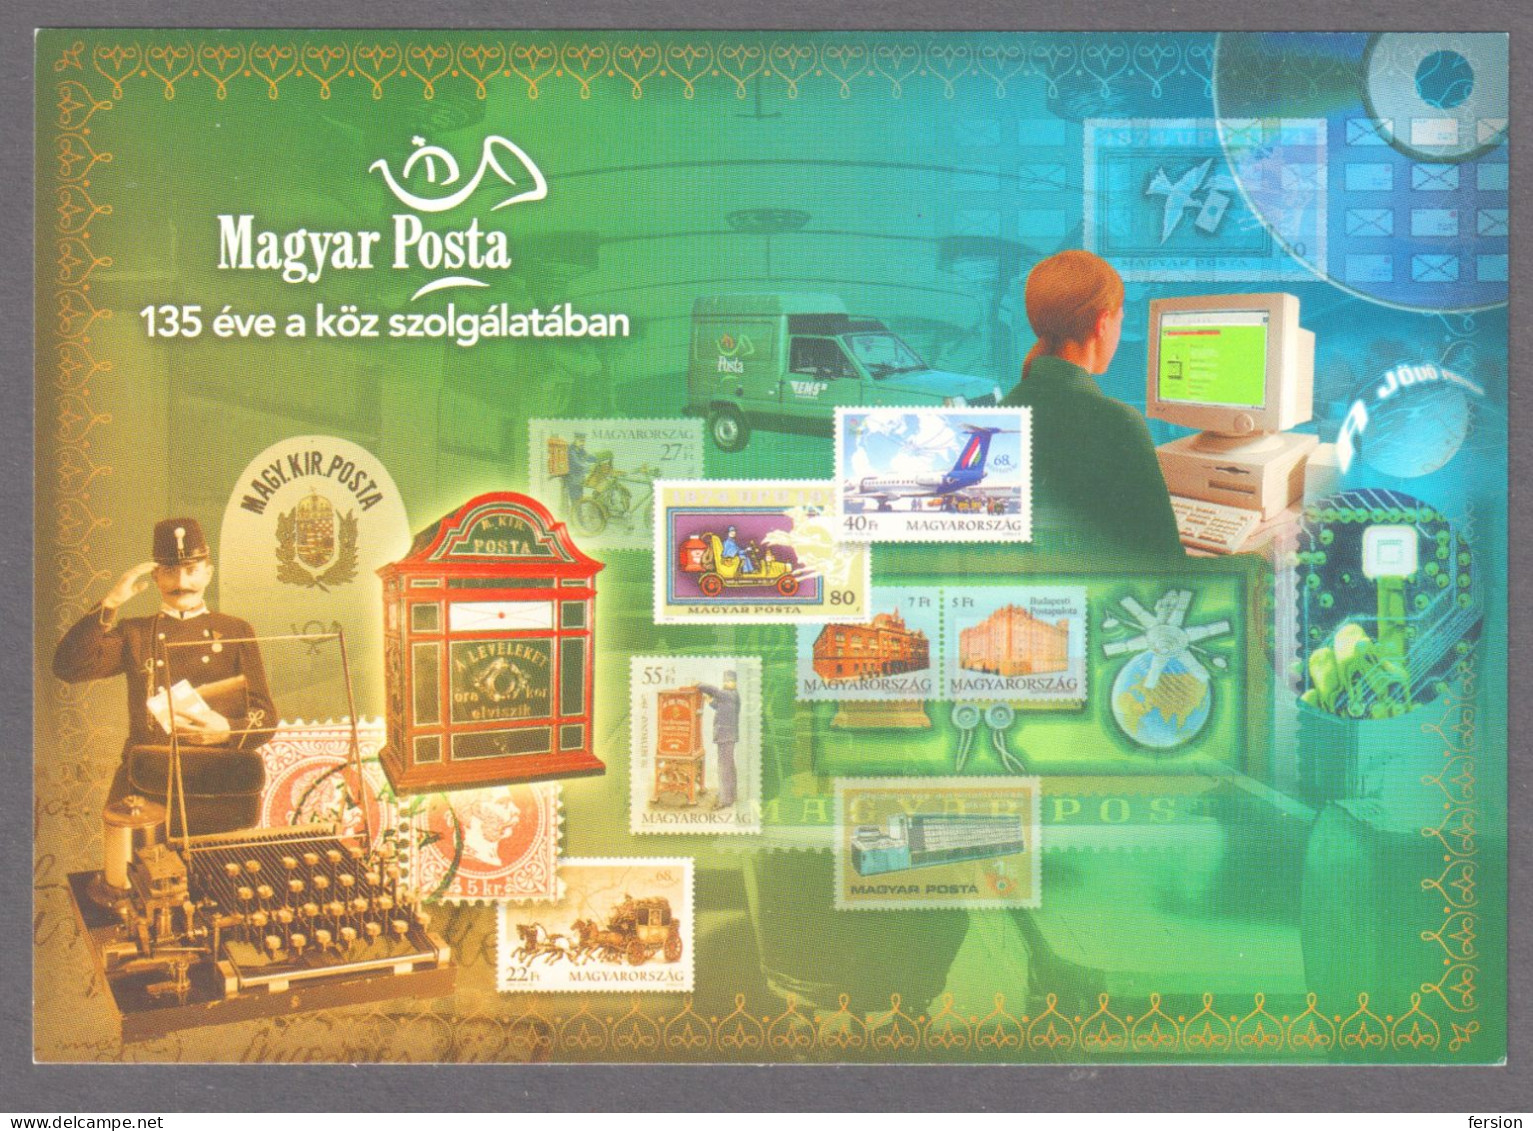 COMPUTER Telegraph MAILBOX Stamp On Stamp POSTCARD 1997 UPU Gervay Mihály POST Director STATIONERY 2002 HUNGARY FDC - Post